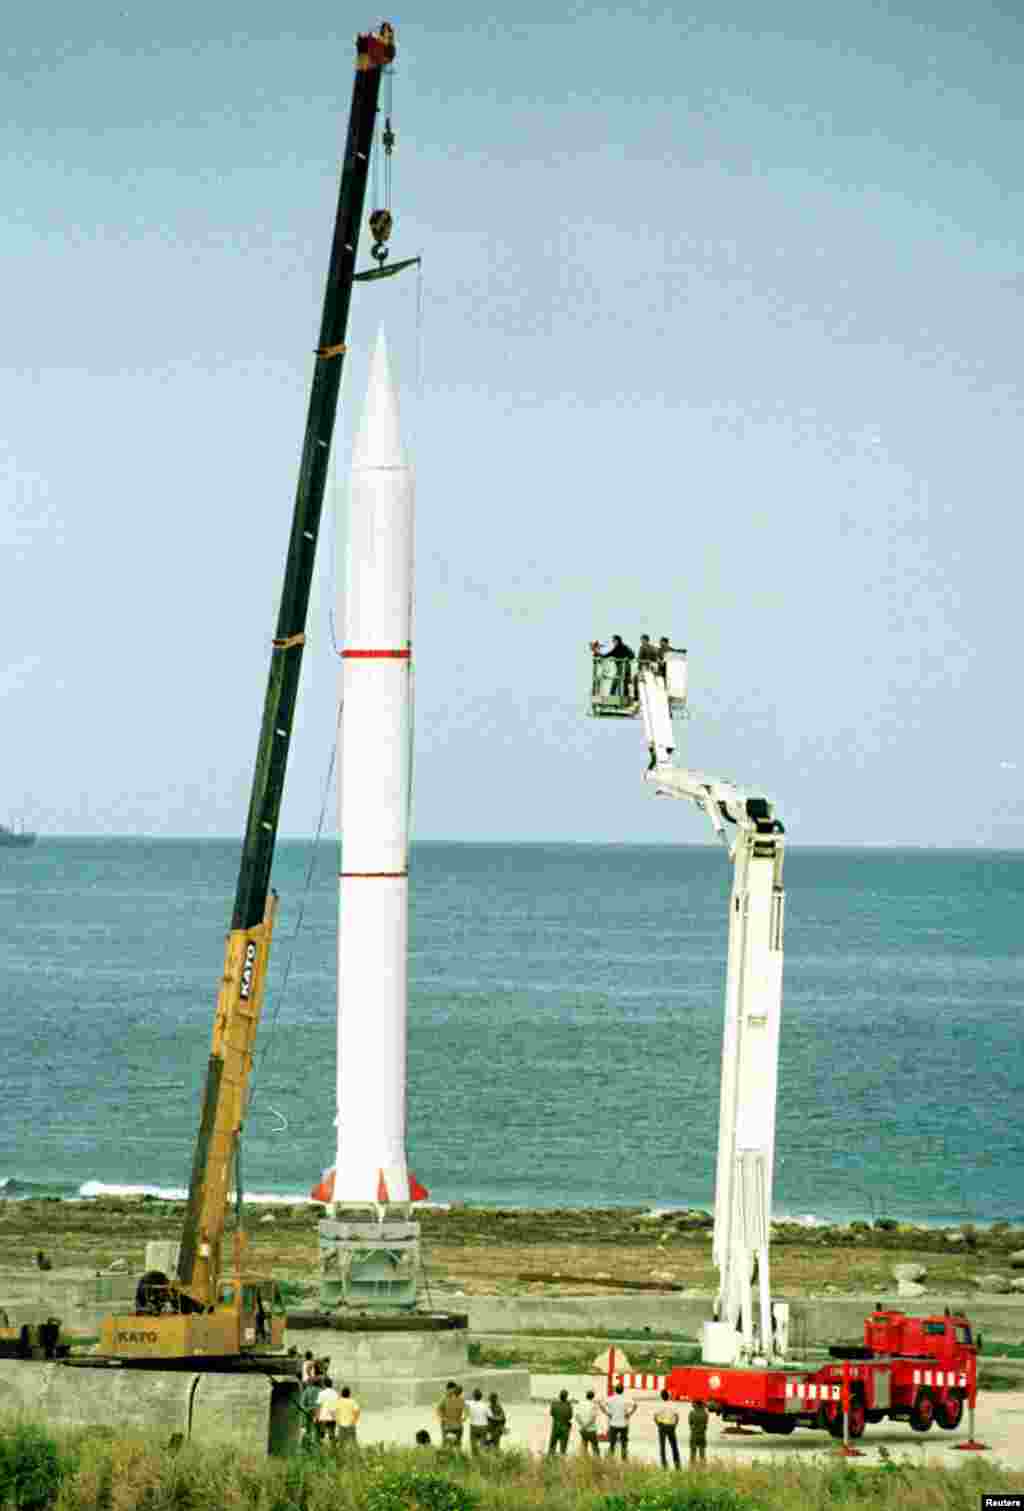 A Soviet missile that was in Cuba and deactivated after the 1962 crisis but left on display there through 1991, when this photo was taken.